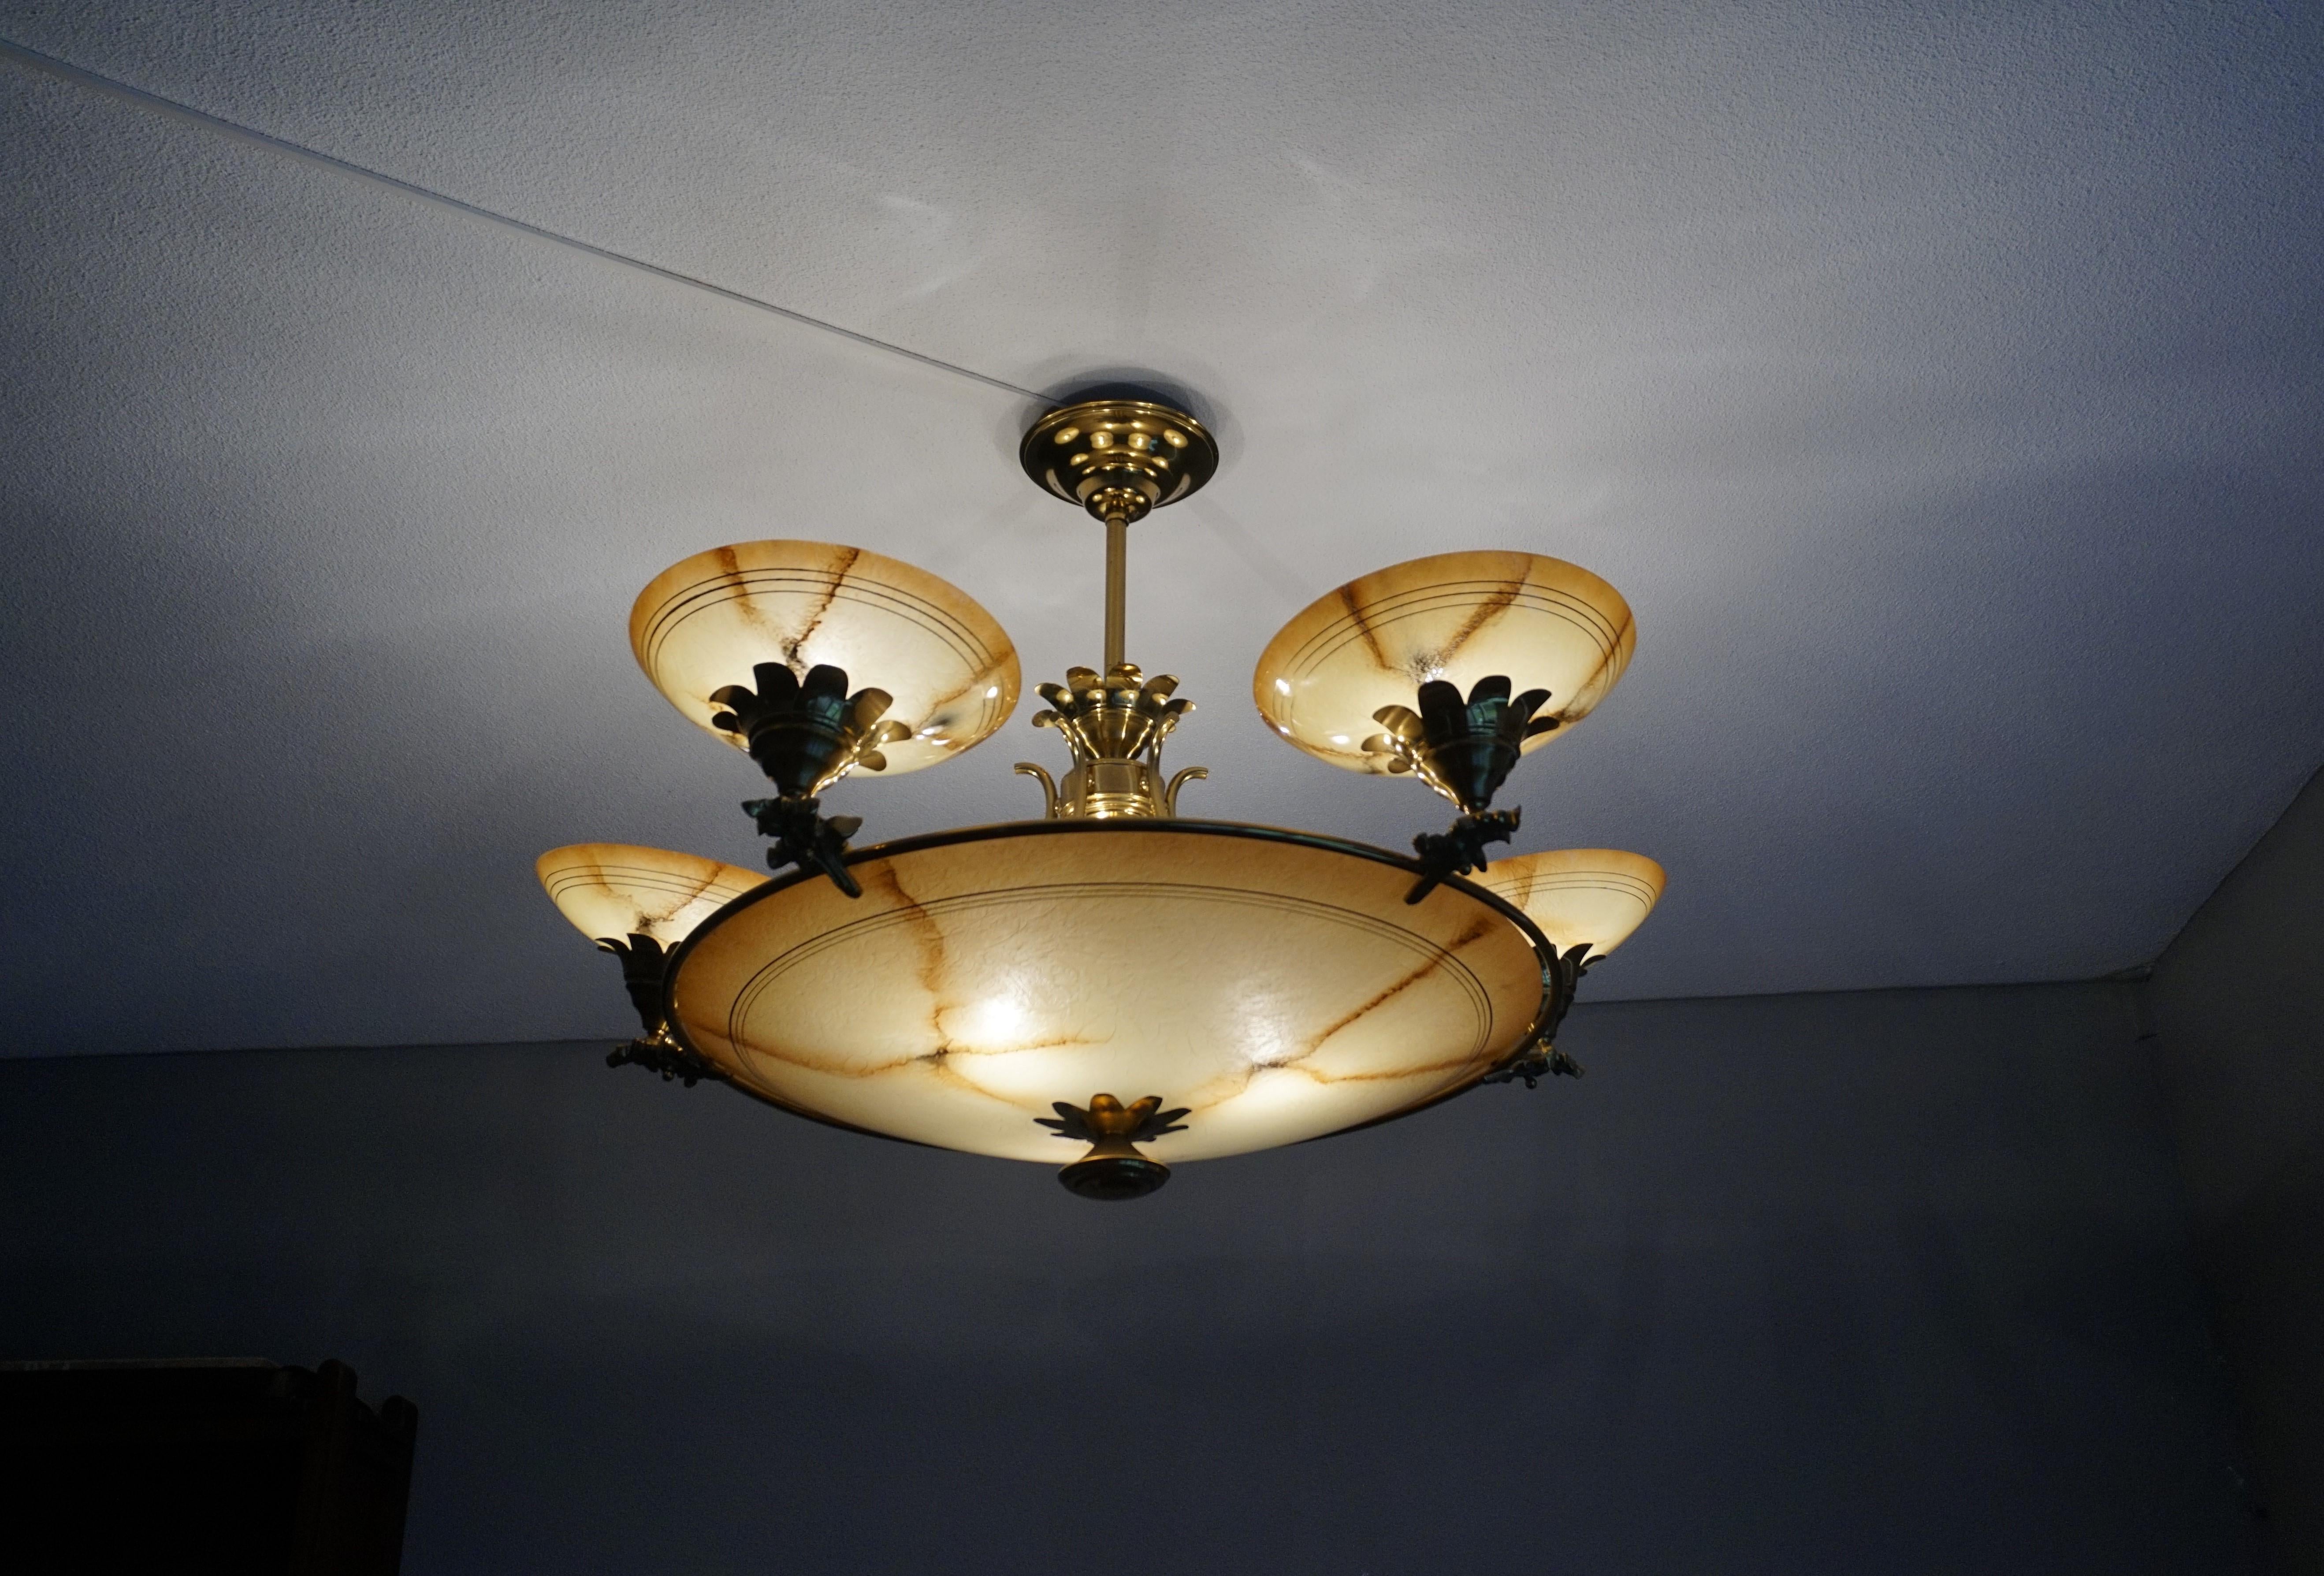 Stunning, Art Deco meets Hollywood Regency chandelier.

If you are looking for a good size chandelier with a unique and great looking design then this midcentury era fixture could be perfect for you. With as much as 8 bulbs (five in the glass shades